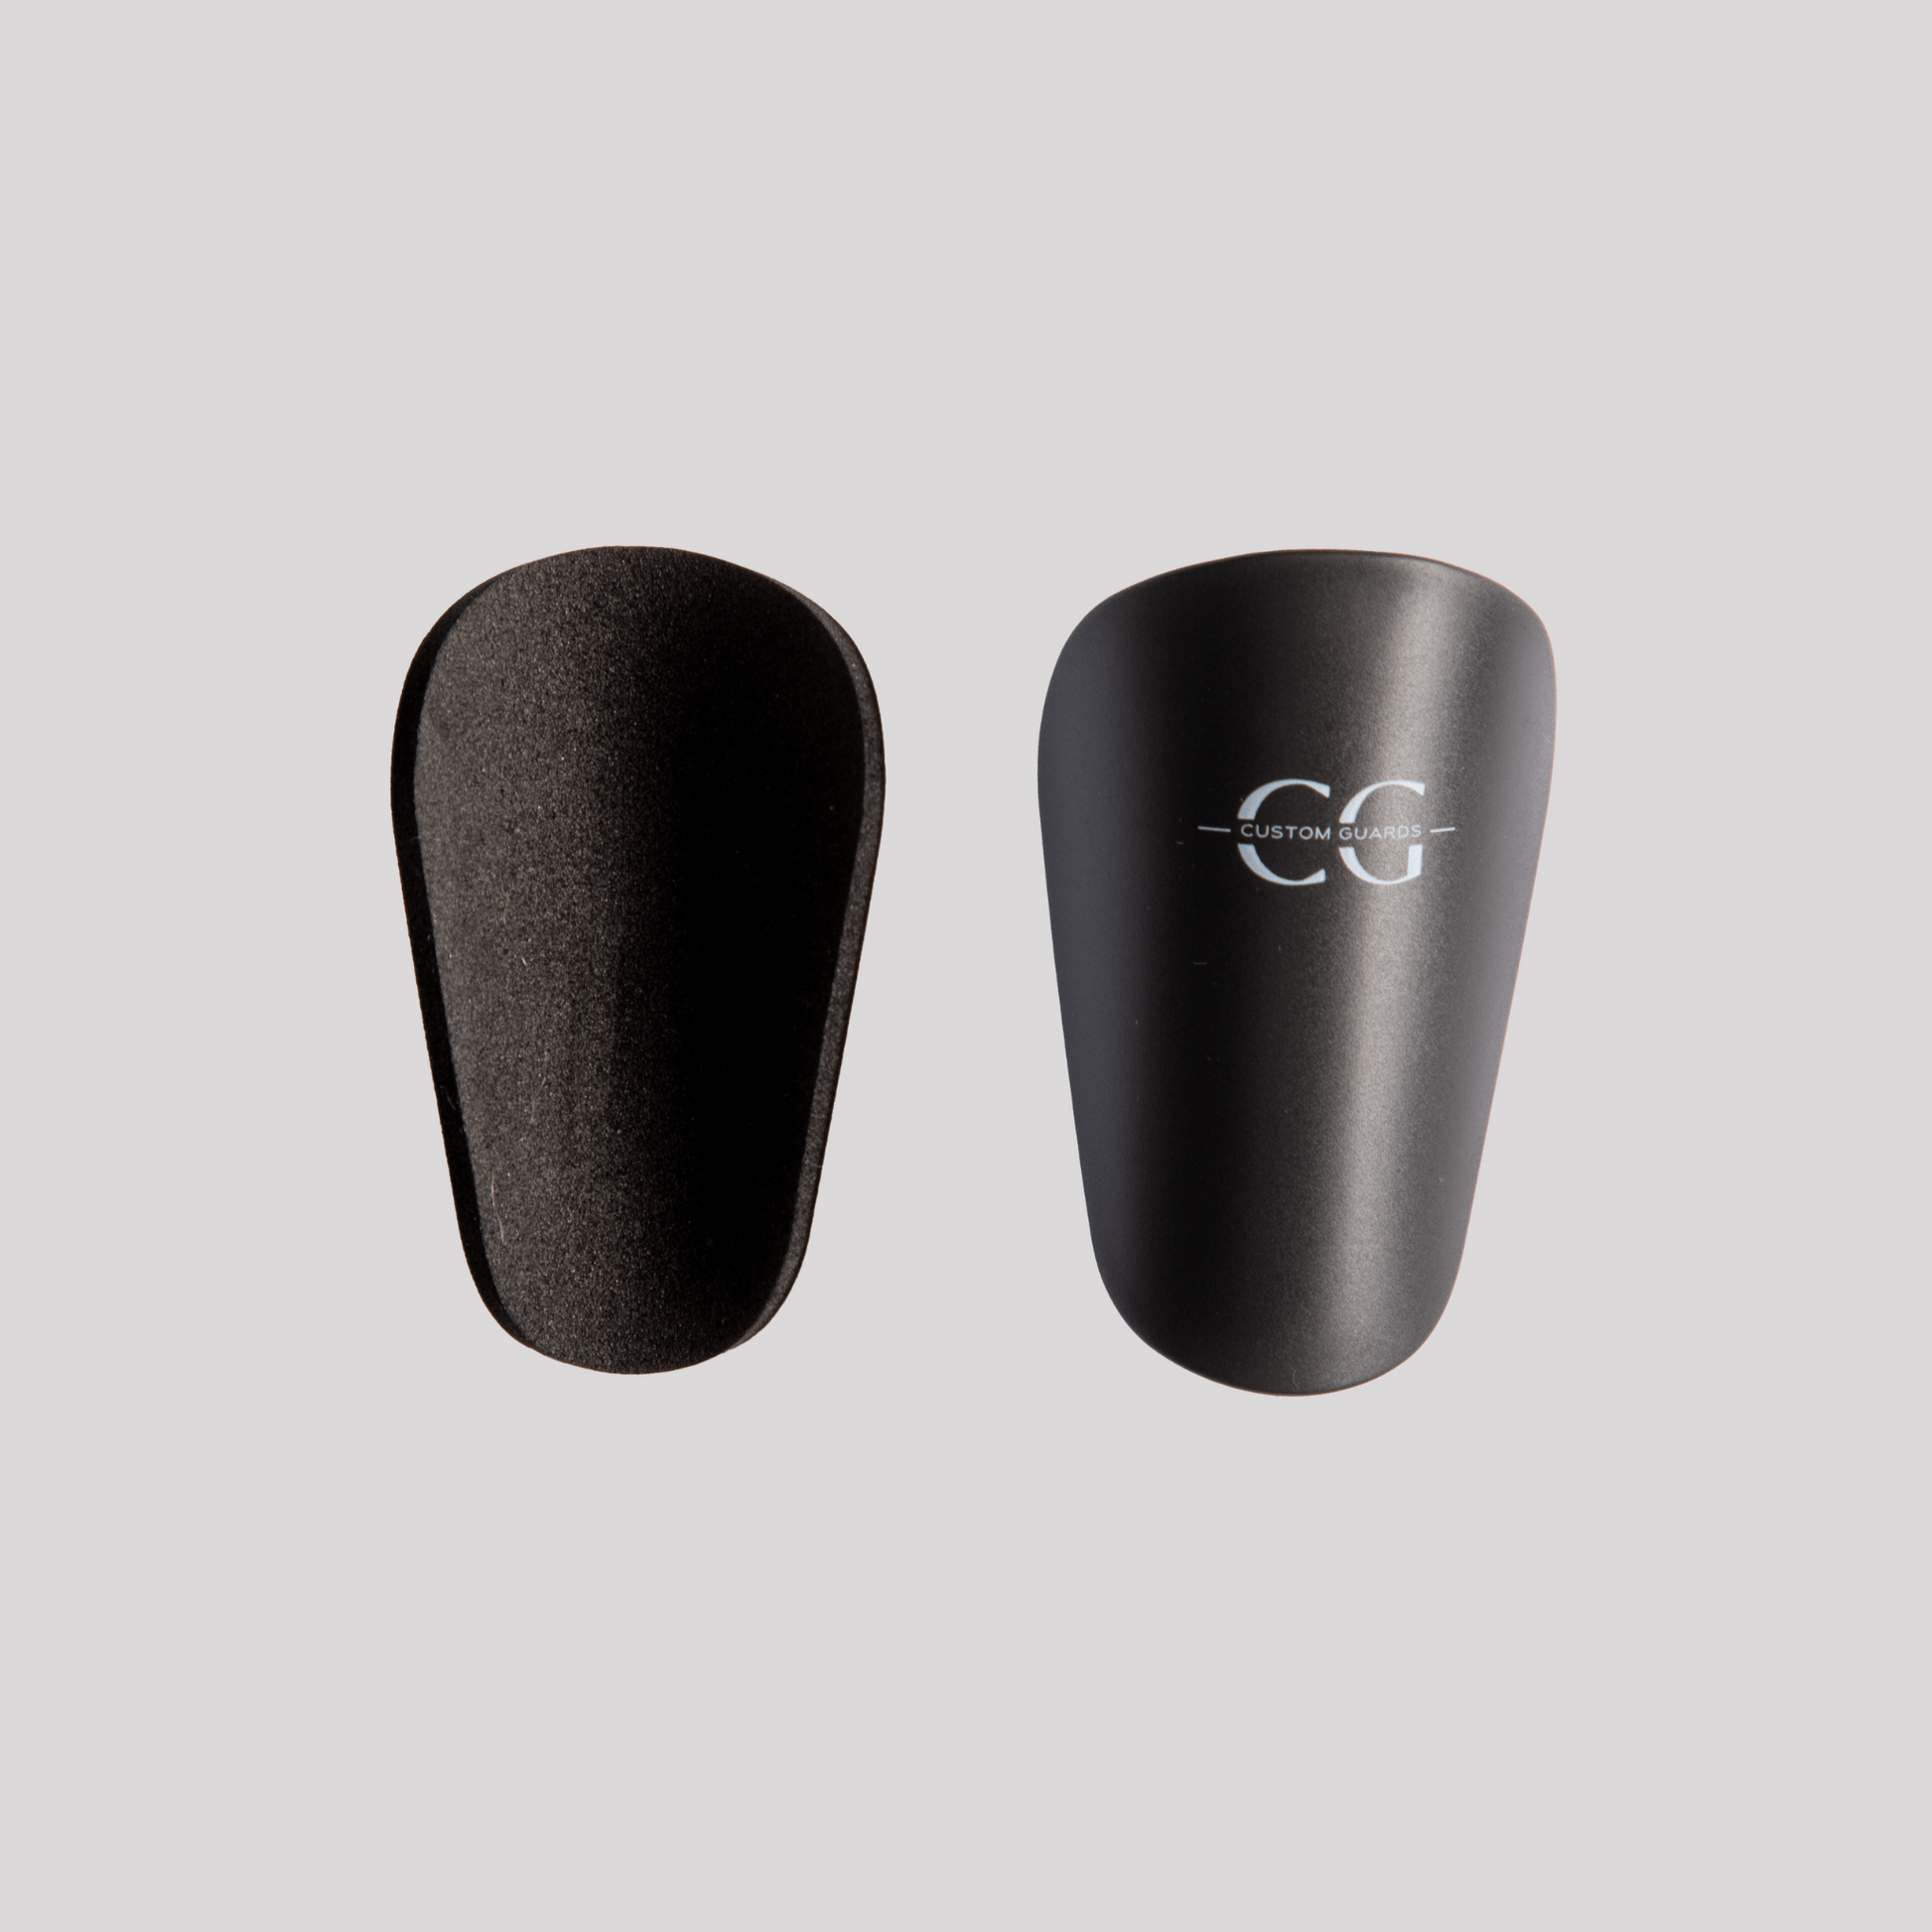 Big on protection, small in size – JOGA Mini Shin Pads have got you co